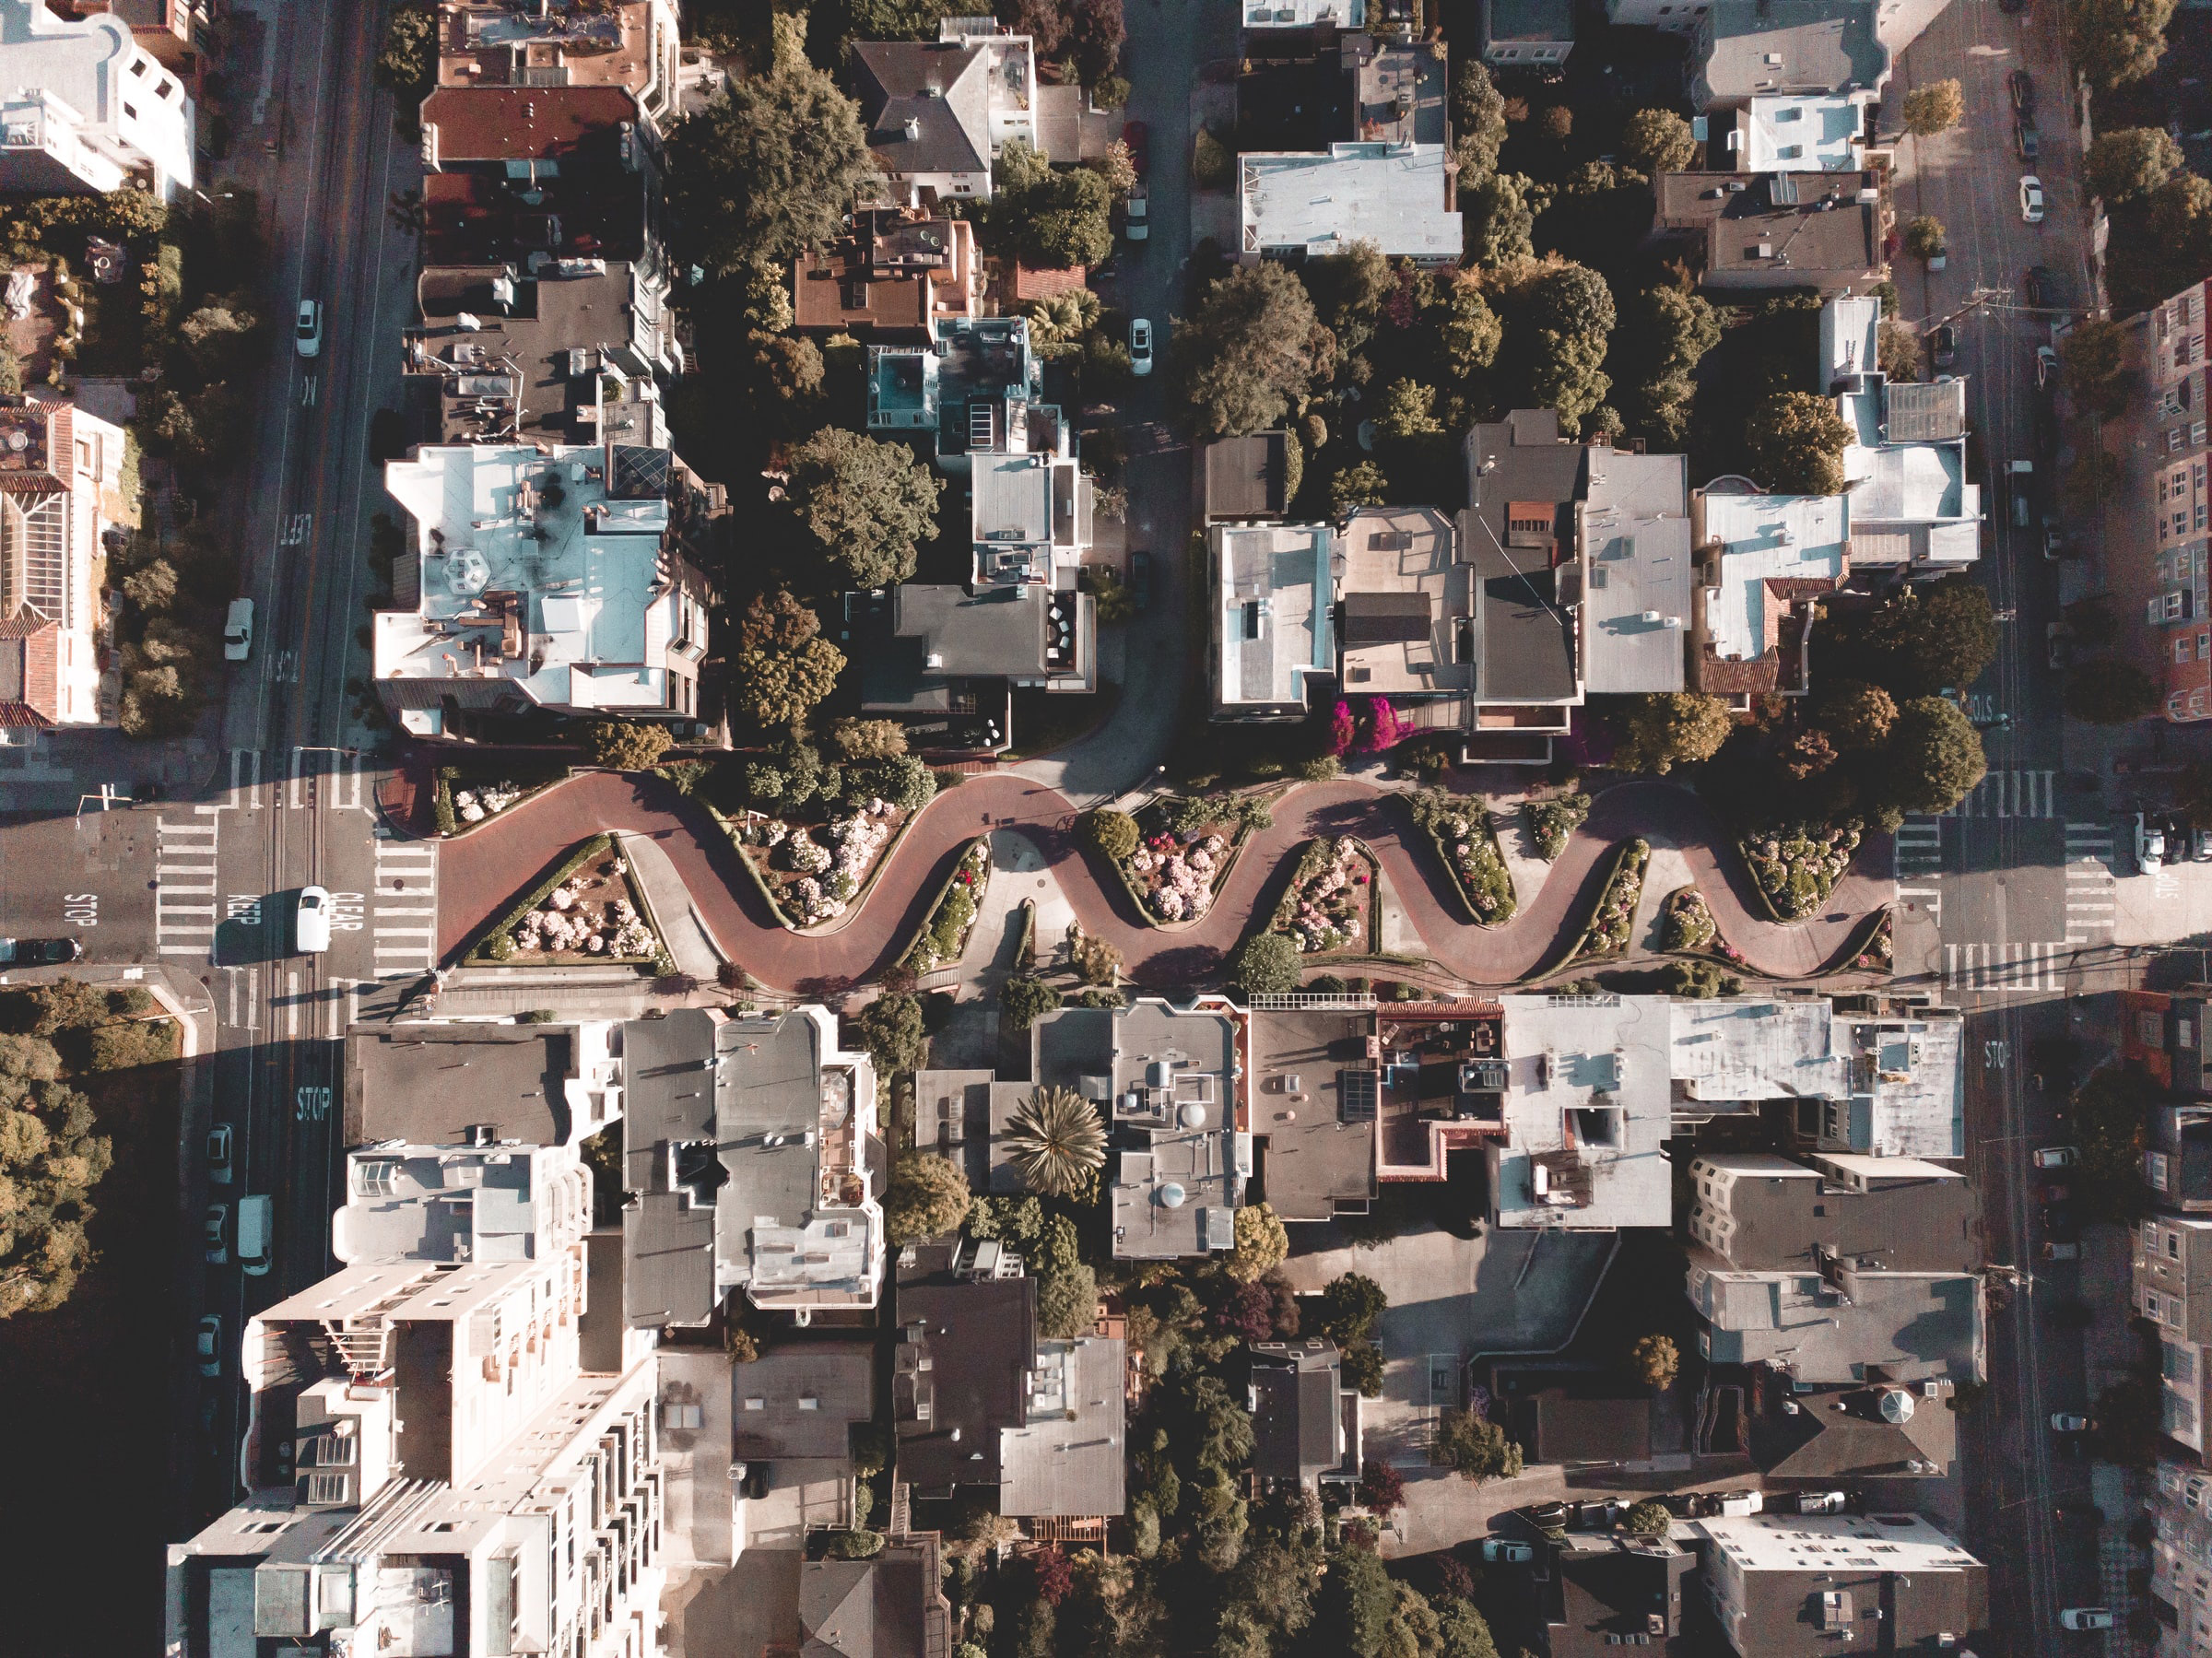 Aerial view of Lombard street in San Francisco, photo by Will Truettner